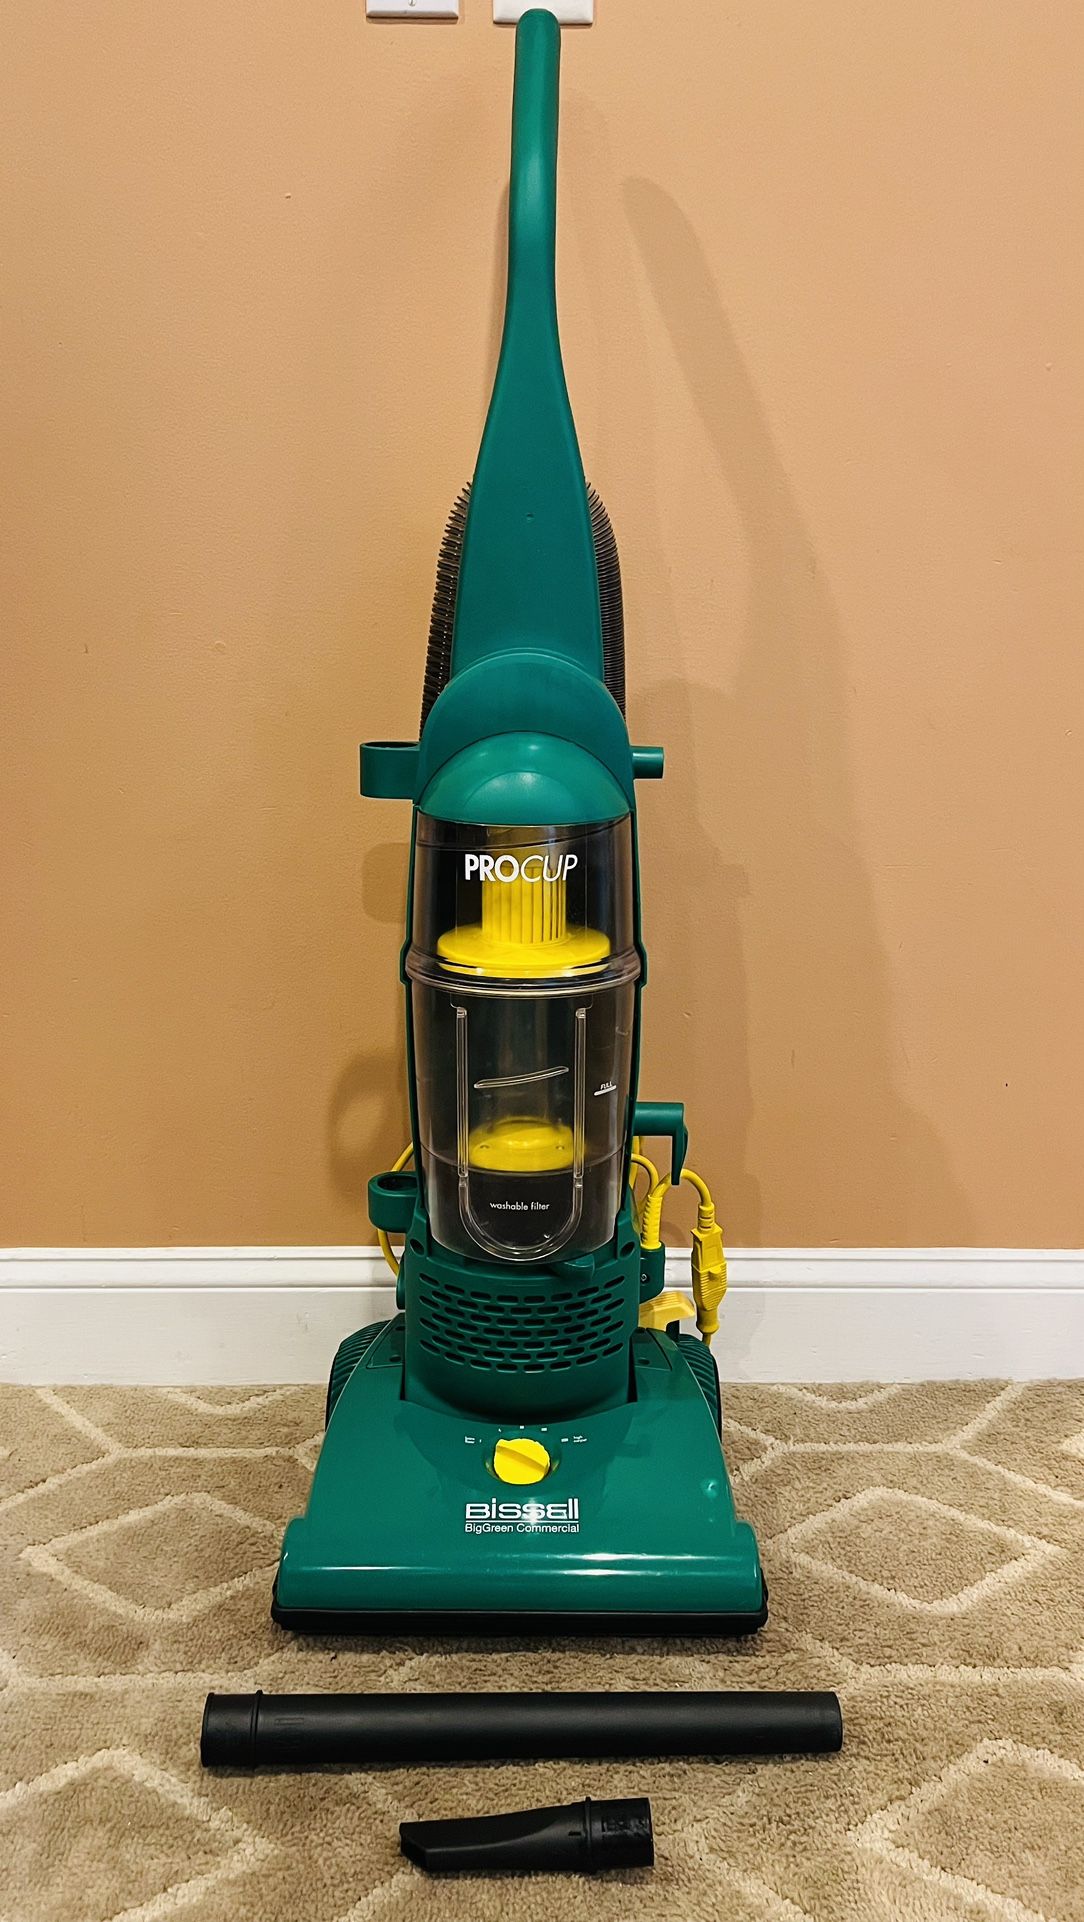 Bissell, big green commercial vacuum cleaner